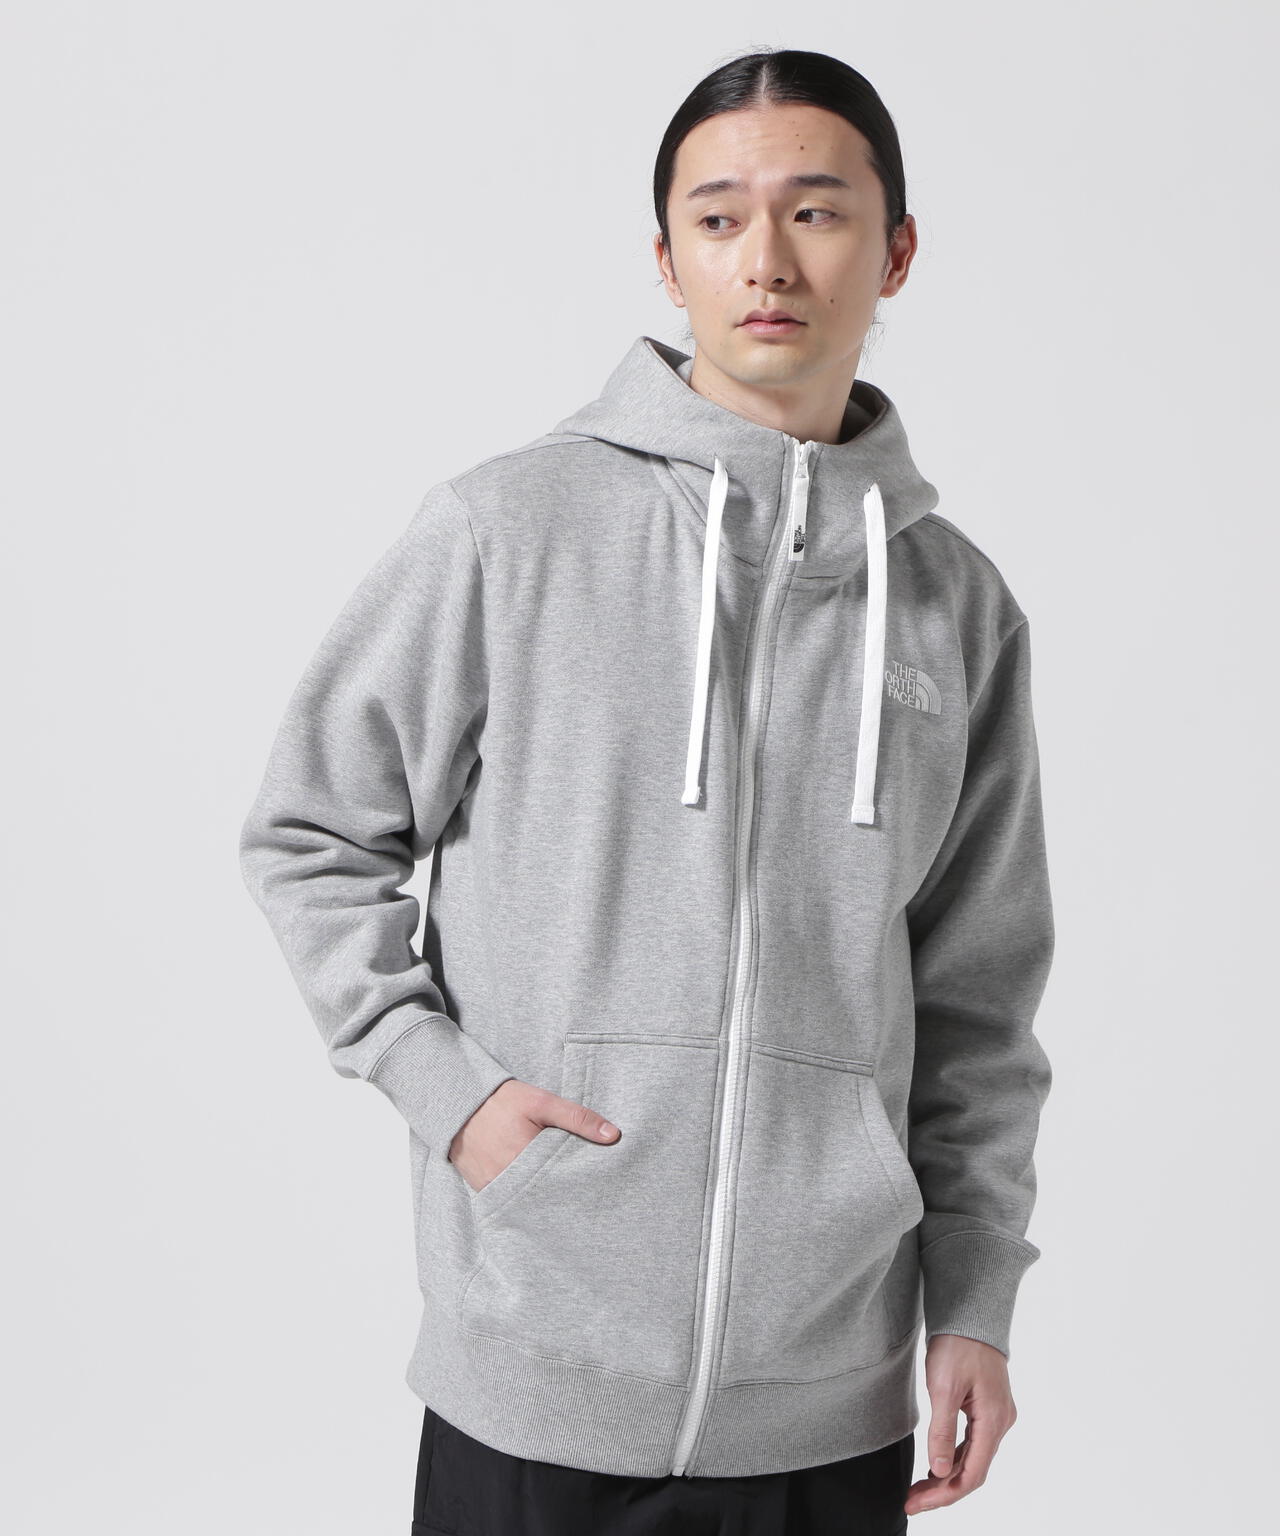 THE NORTH FACE (ノースフェイス) Rearview FullZip Hoodie | B'2nd